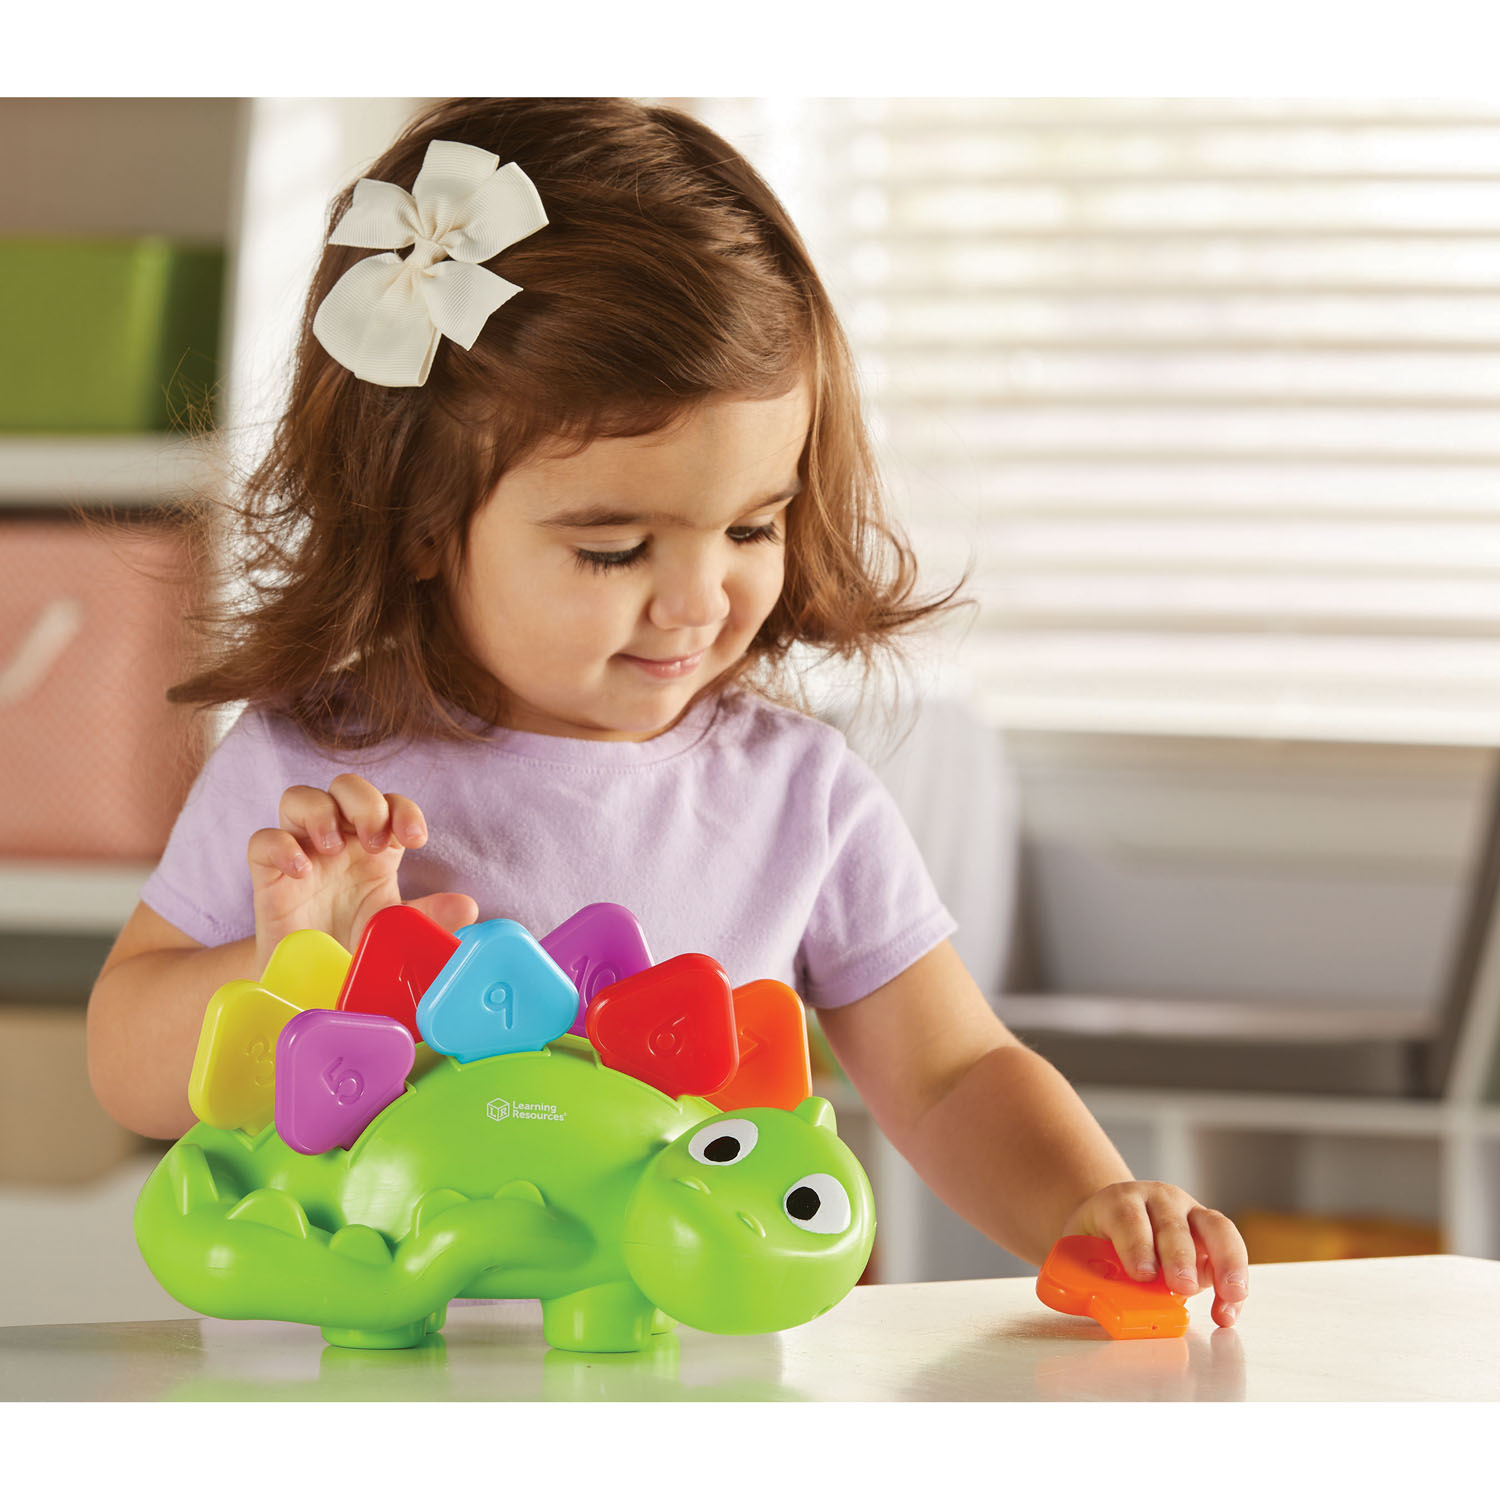 Learning Resources Steggy the Fine Motor Dino image number null